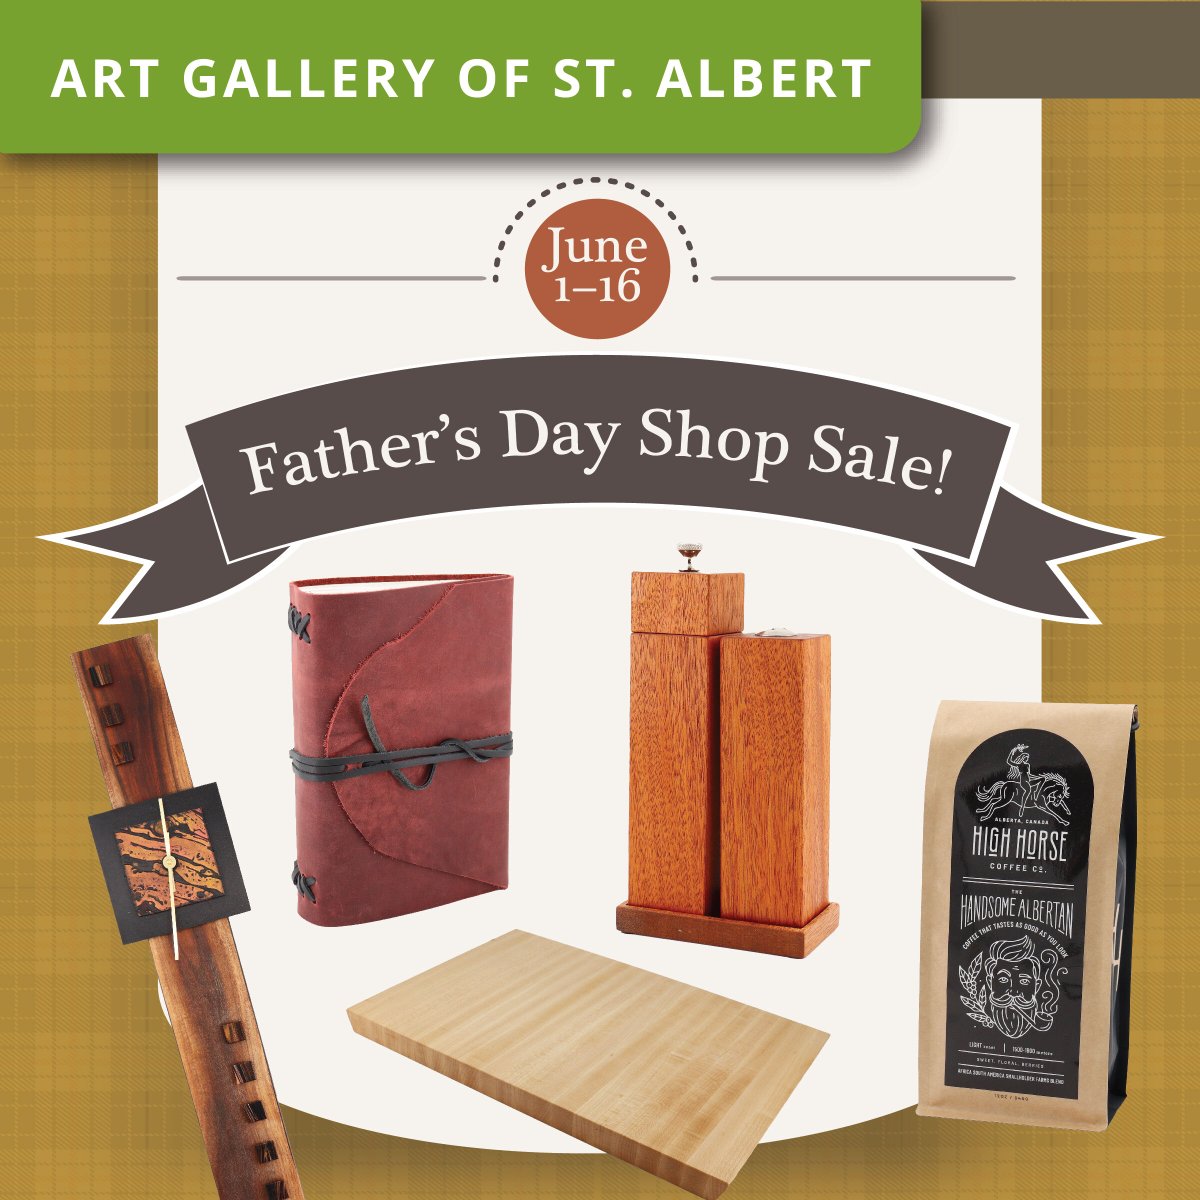 Father’s Day Shop Sale! One-of-a-kind gifts that DAD will surely treasure!  Save 10% on select one-of-a-kind handcrafted gifts and locally roasted coffee!  Shop online or in-store at the Art Gallery of St. Albert Gift Shop. #sale #fathersday #giftsforhim #giftsfordad #handmade